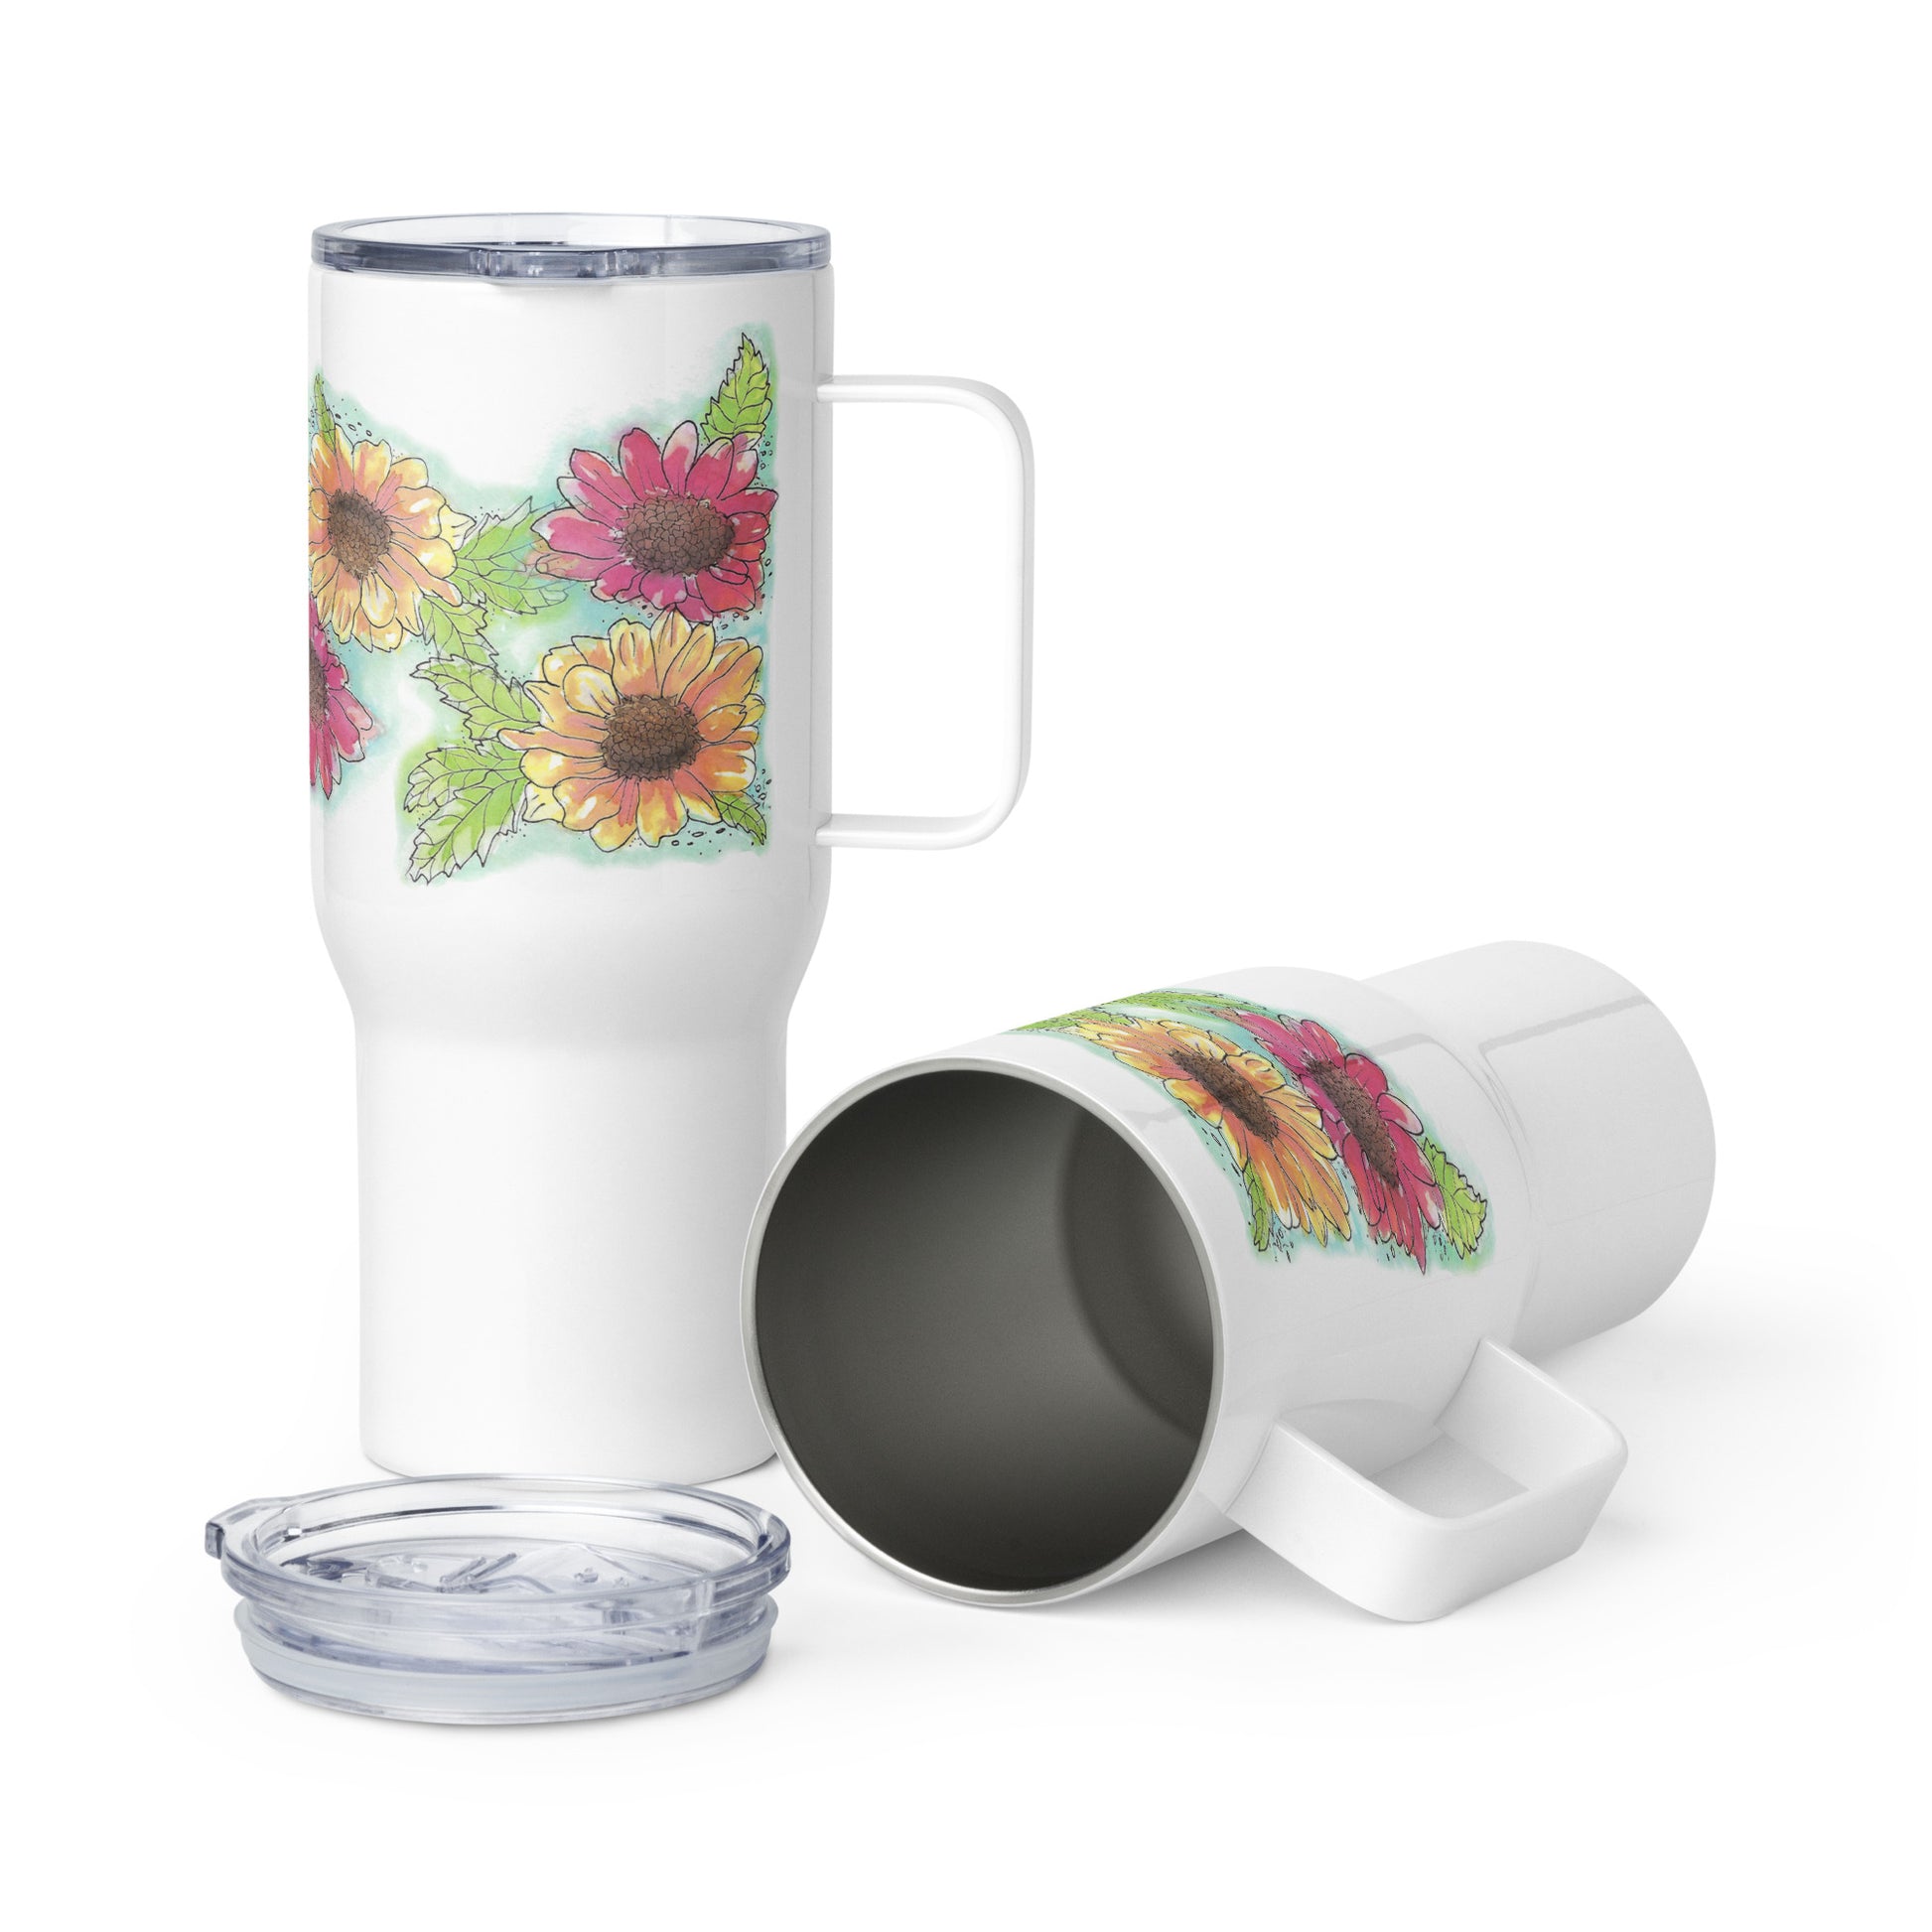 Gerber daisies stainless steel travel mug with handle. Holds 25 ounces and has a BPA-free plastic lid.